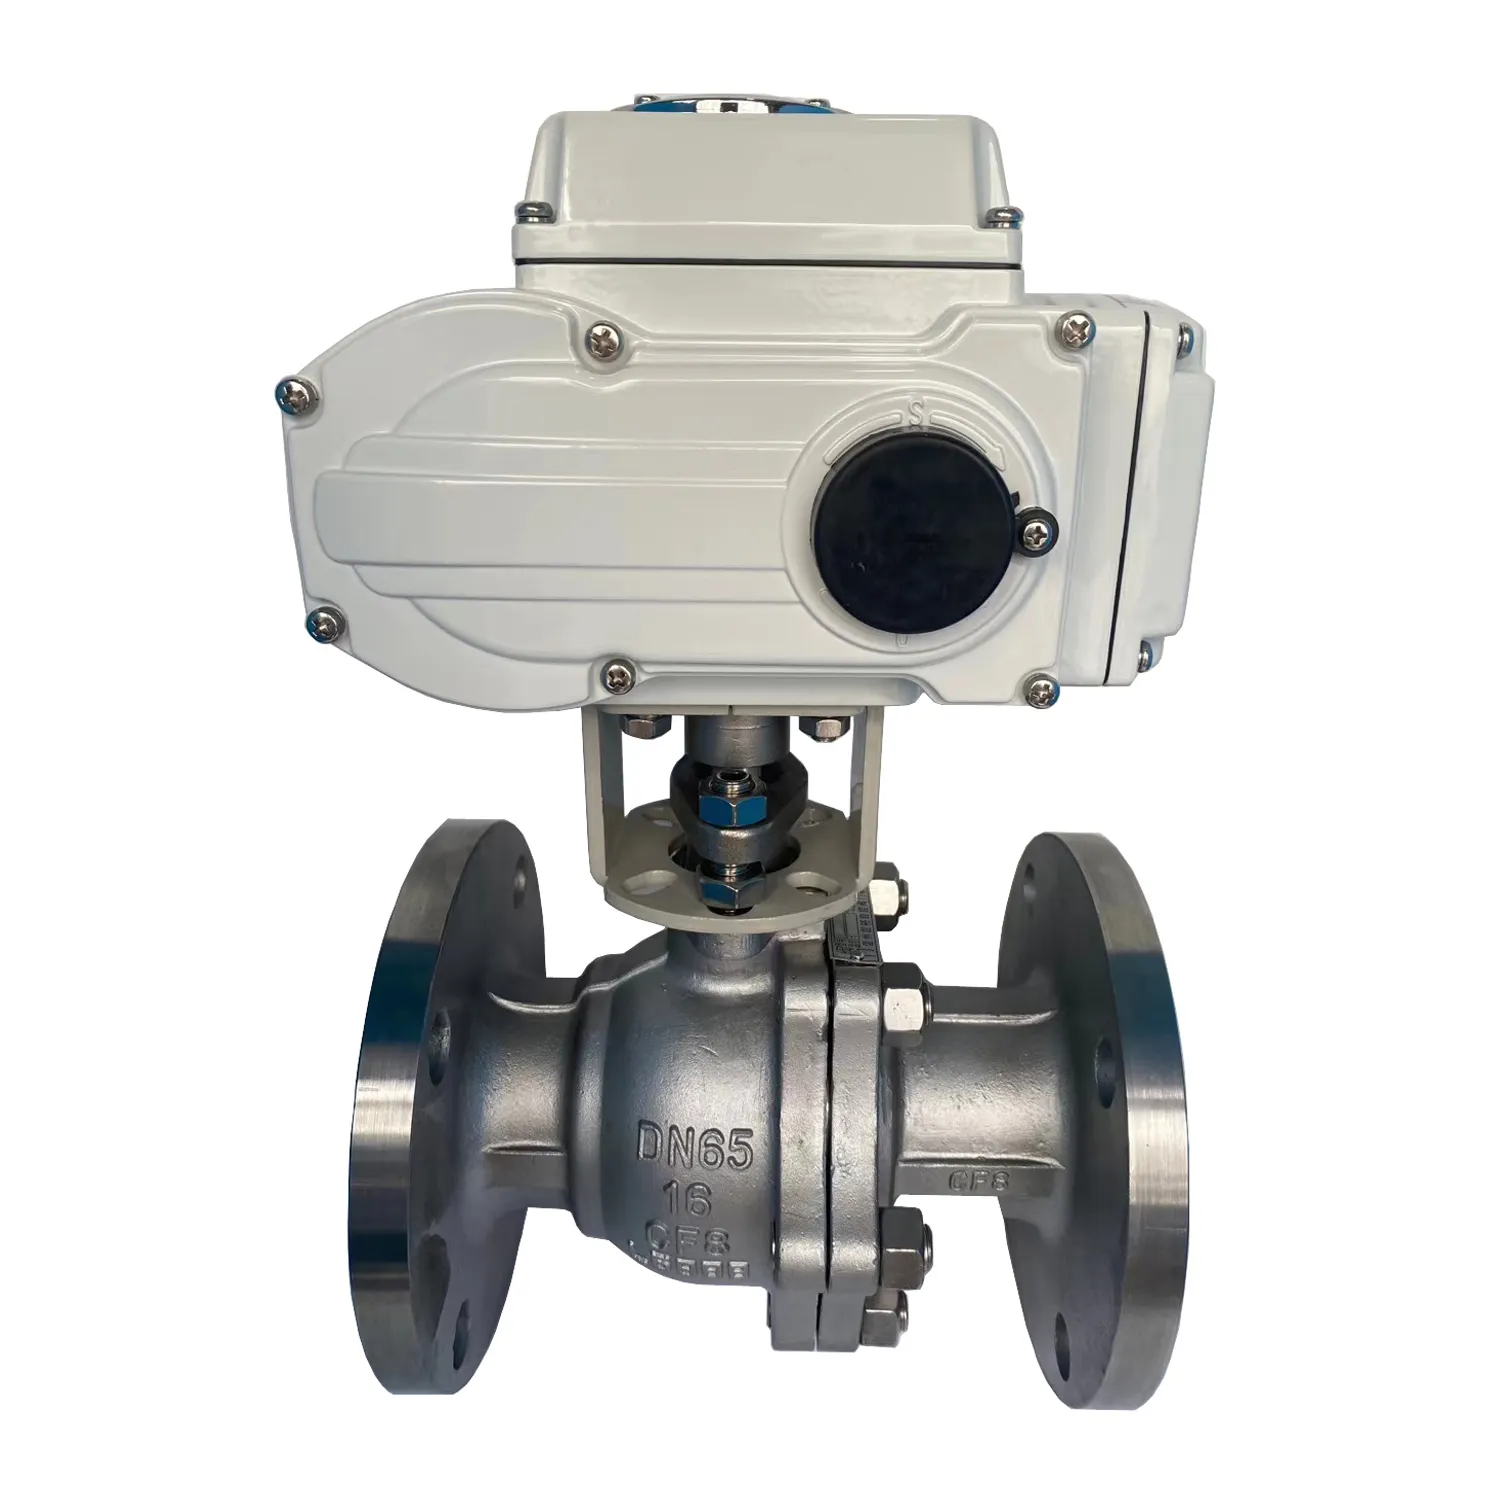 AC220V 24VDC 4-20mA electric actuator Water flow control ball valve 2 inch motorized valve